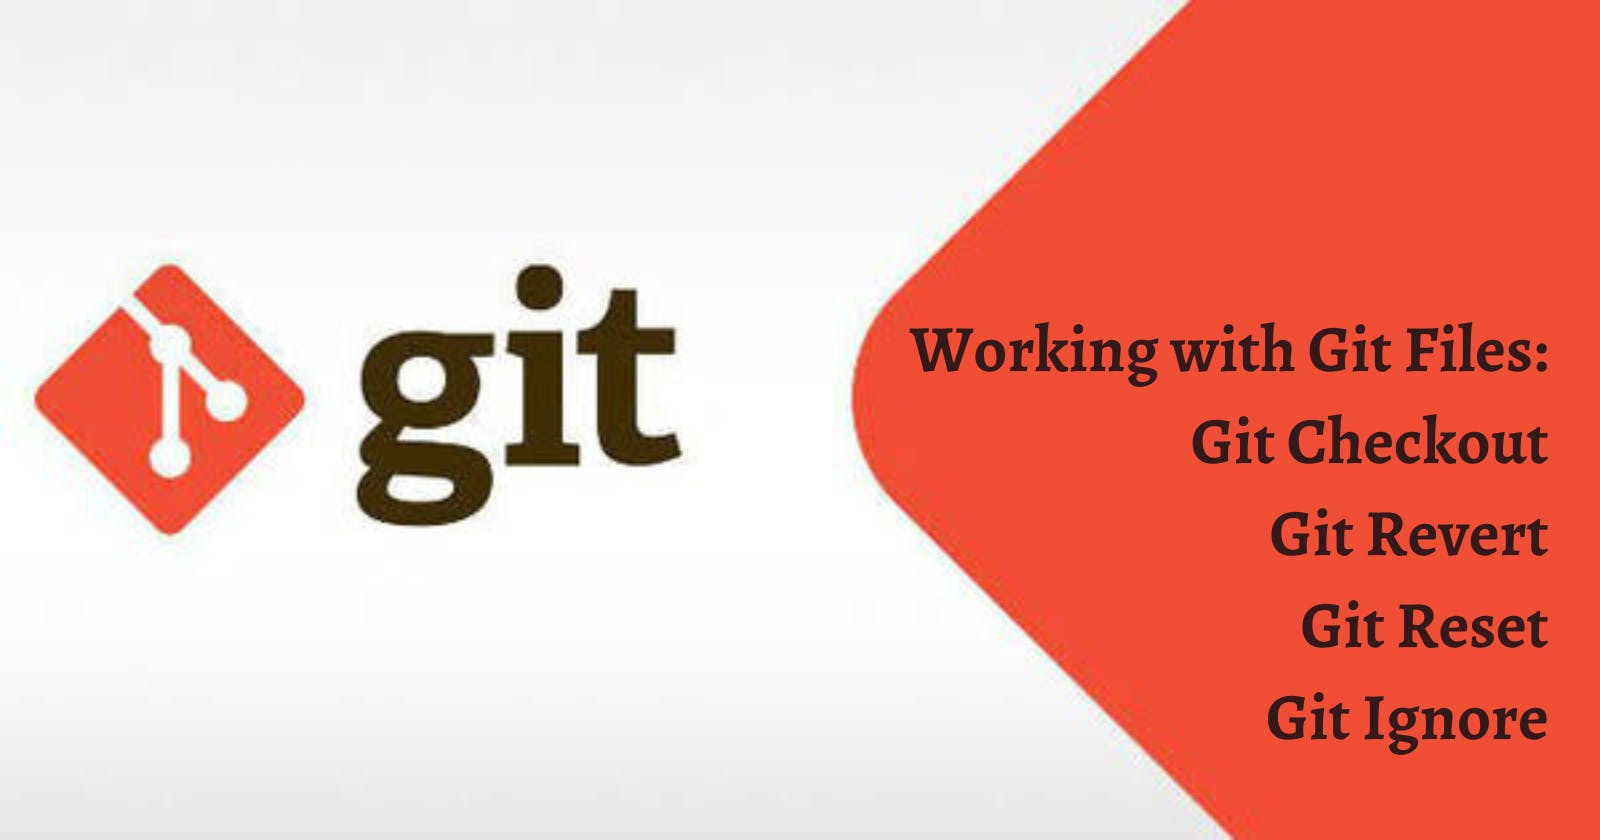 Working with Git: How to move between commits,  undo the changes made and ignore the files?
Git Checkout, Git Revert and Git Reset, Git Ignore